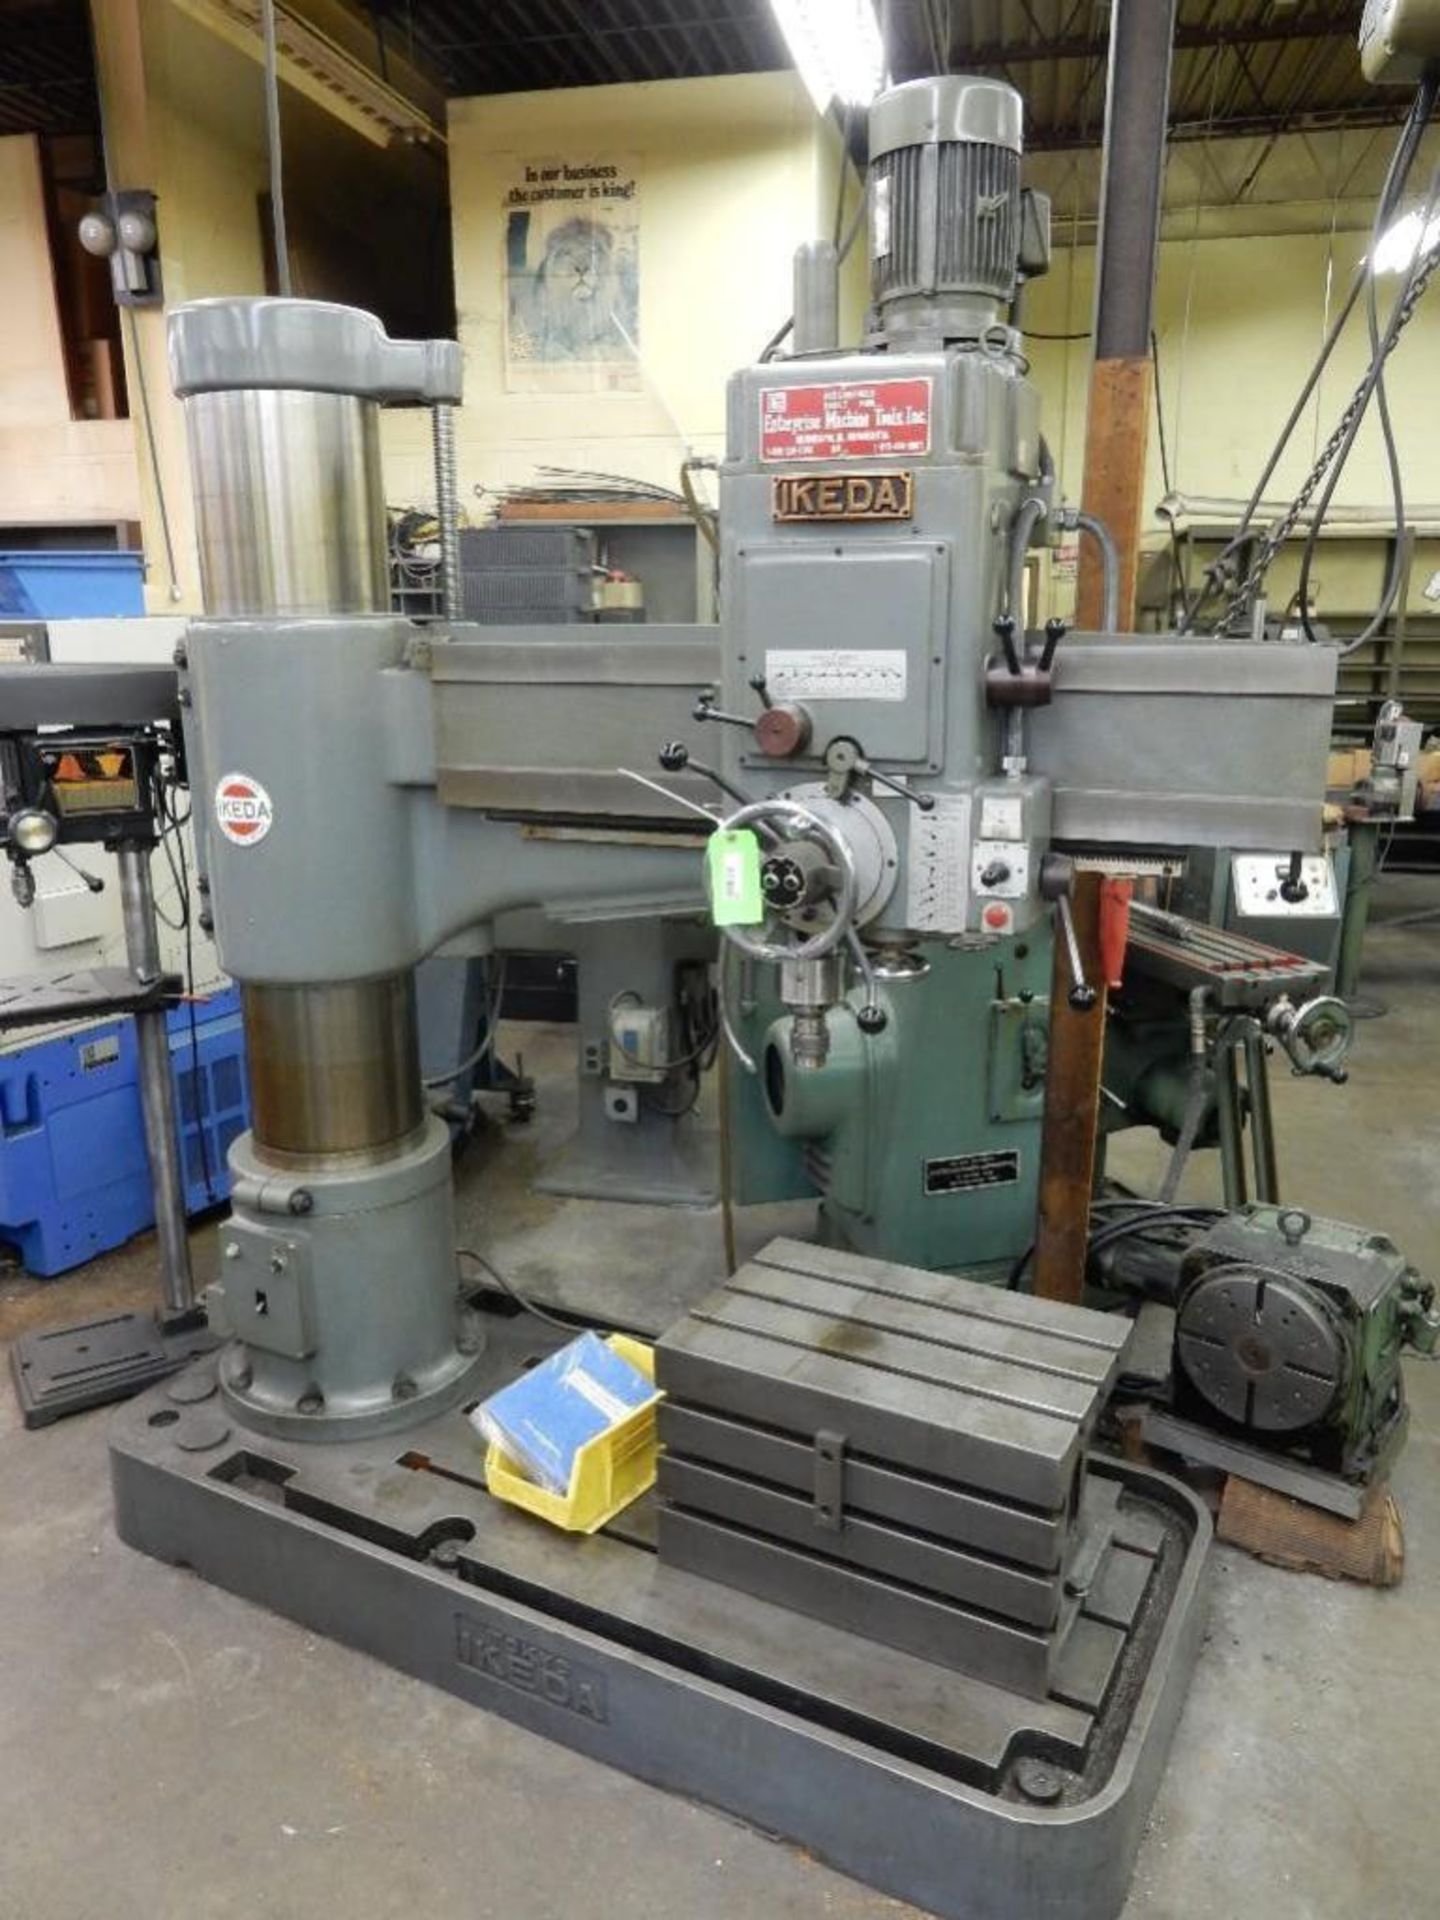 Ikeda Model RM-1375 Radial Arm Drill, 13" Column, 5' Arm, 30-1500 RPM Spindle Speeds, 26.5"